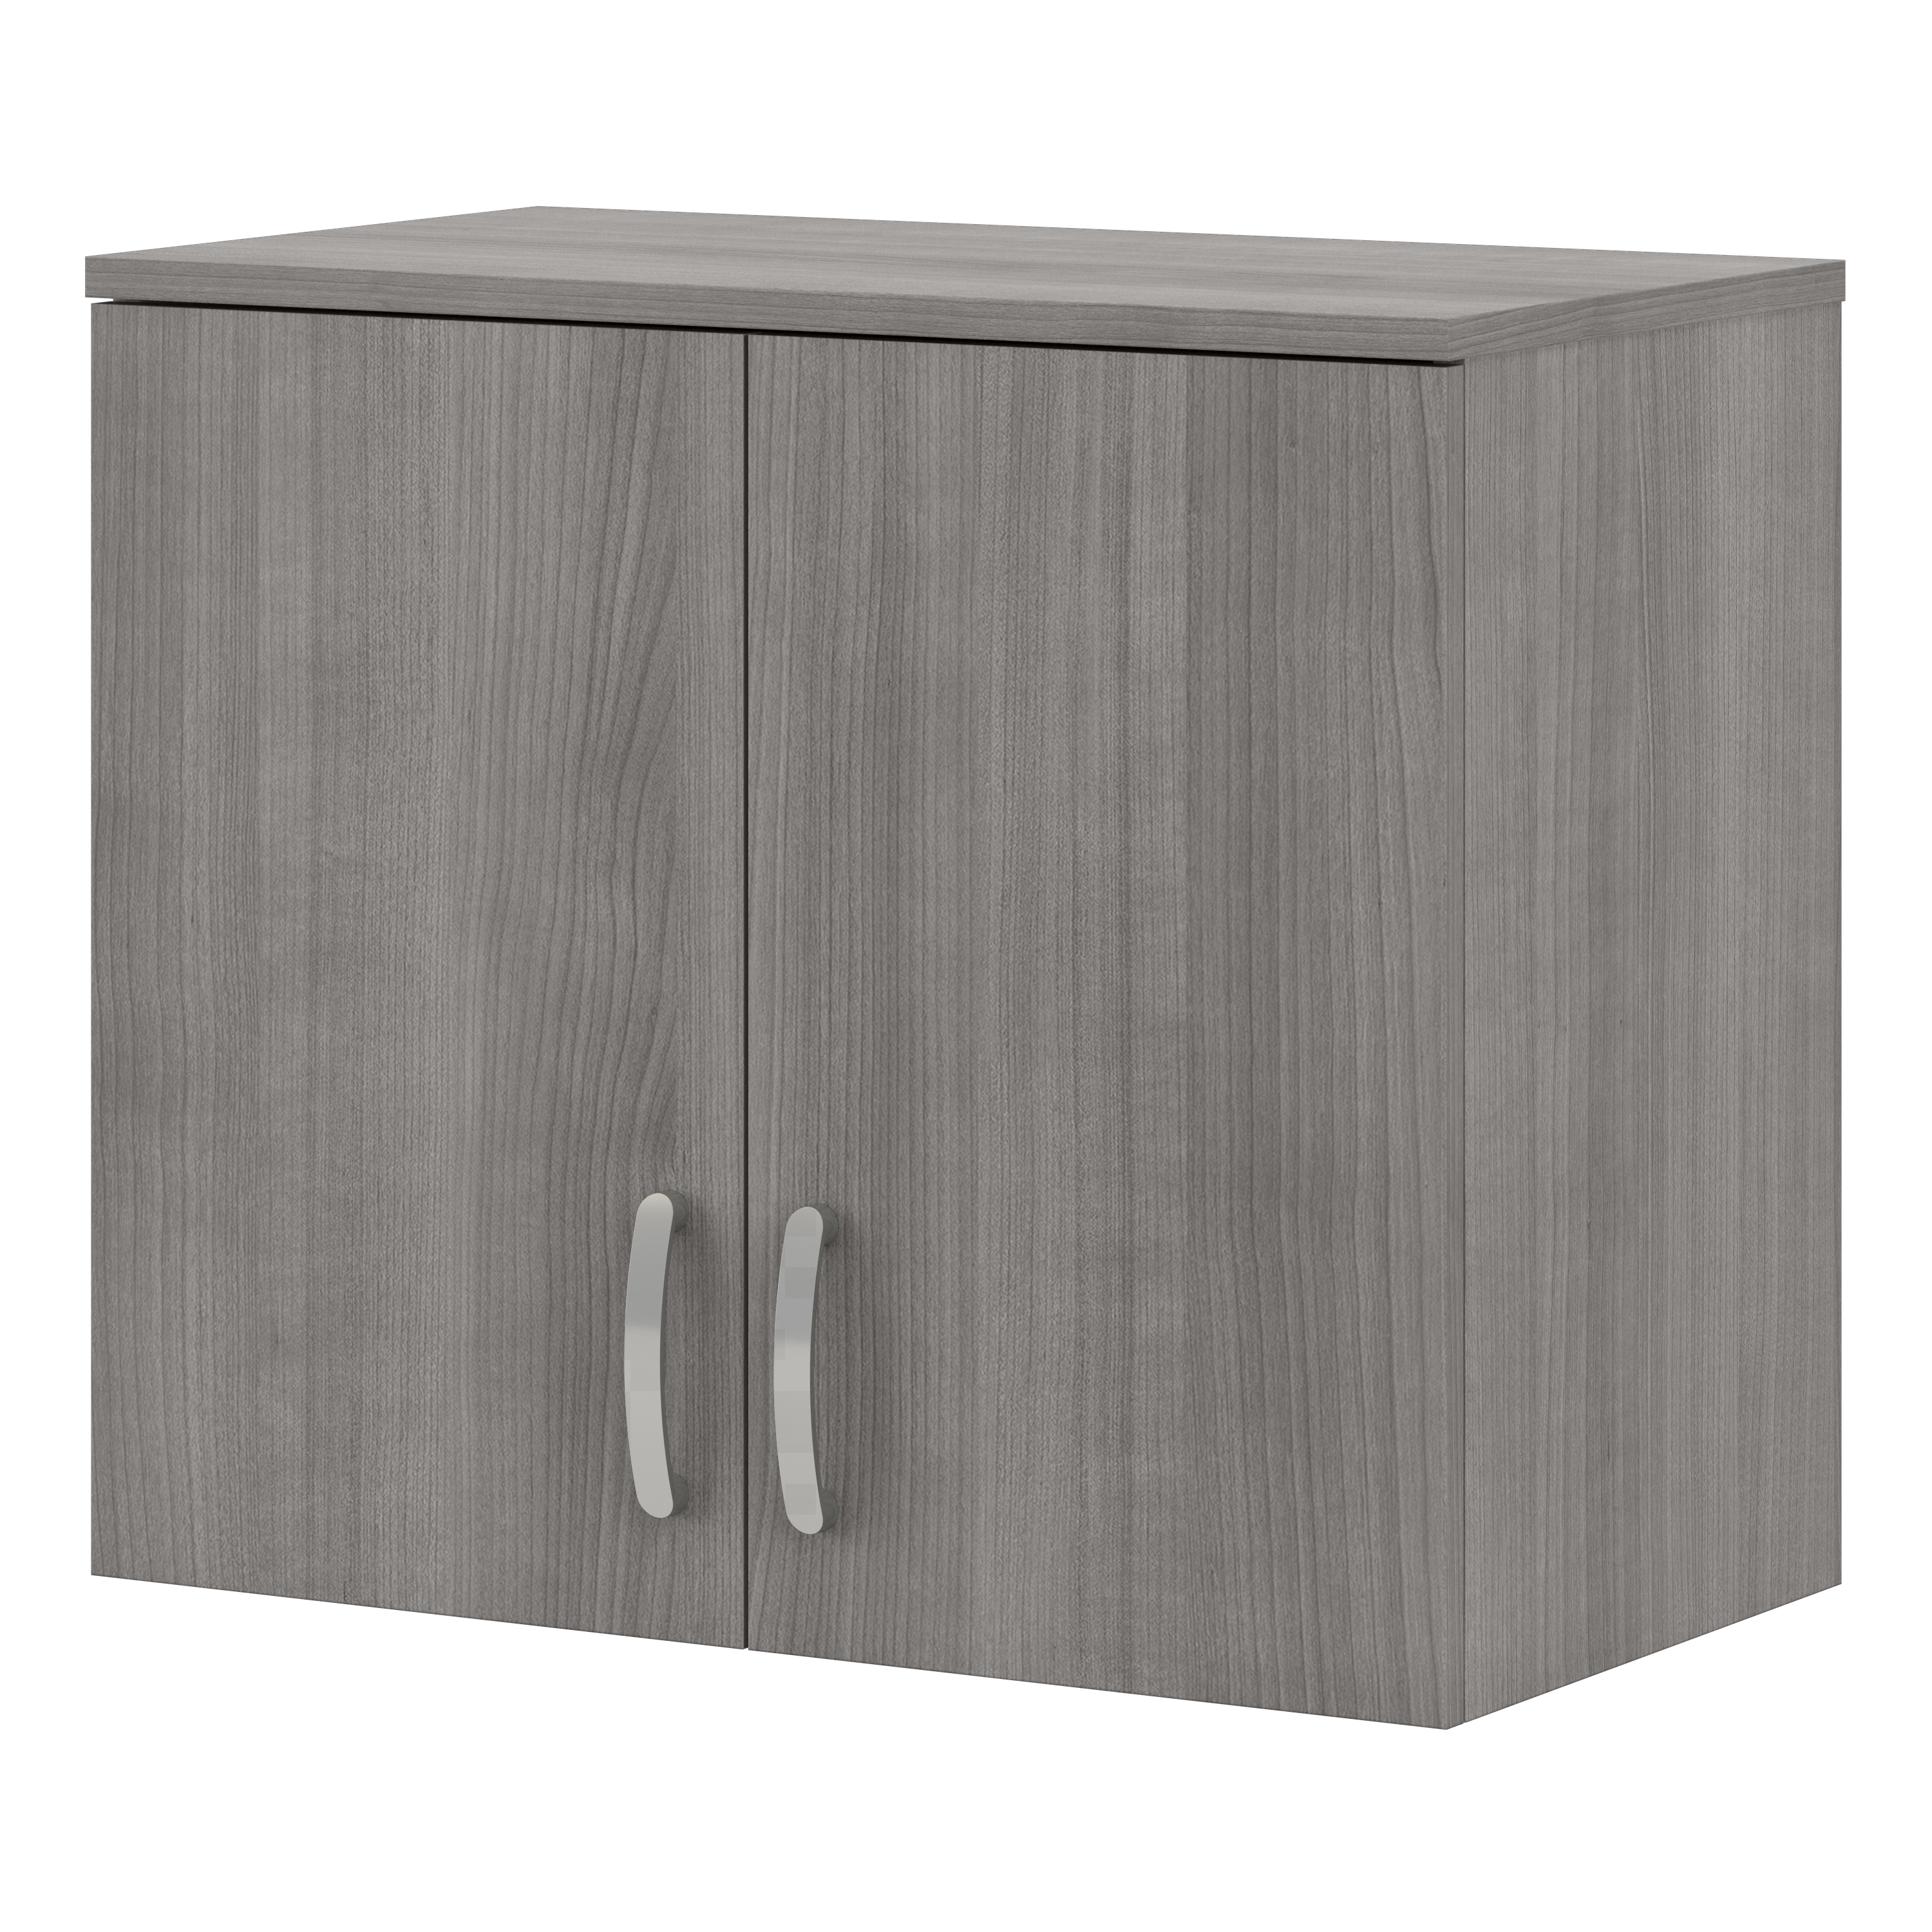 Shop Bush Business Furniture Universal Garage Wall Cabinet with Doors and Shelves 02 GAS428PG-Z #color_platinum gray